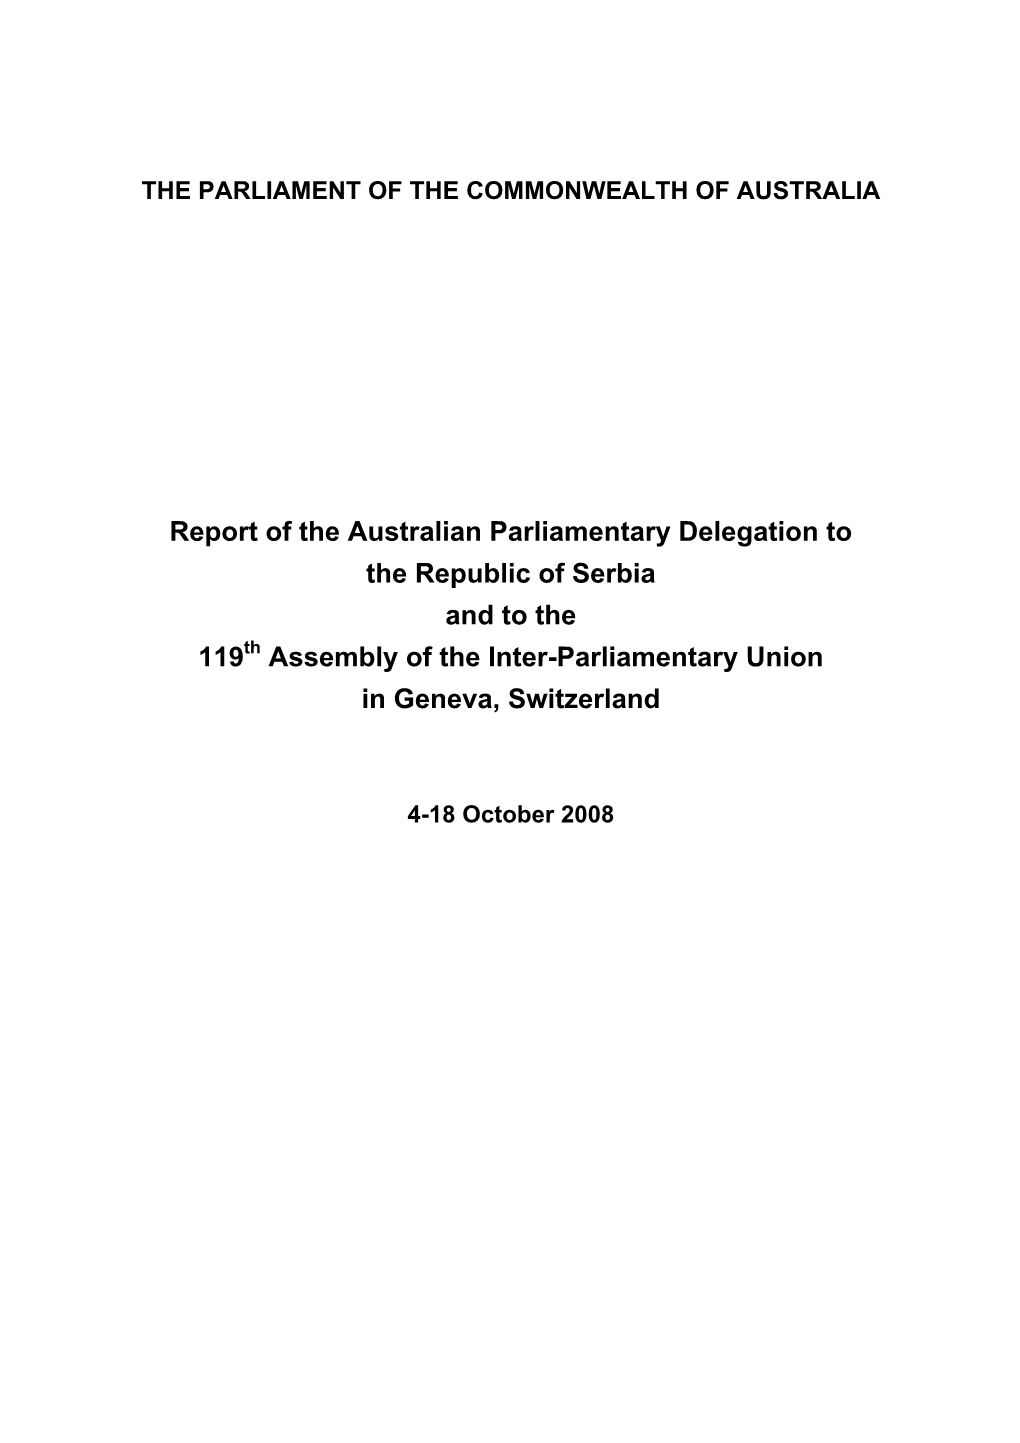 Report of the Australian Parliamentary Delegation to the Republic of Serbia and to the 119Th Assembly of the Inter-Parliamentary Union in Geneva, Switzerland